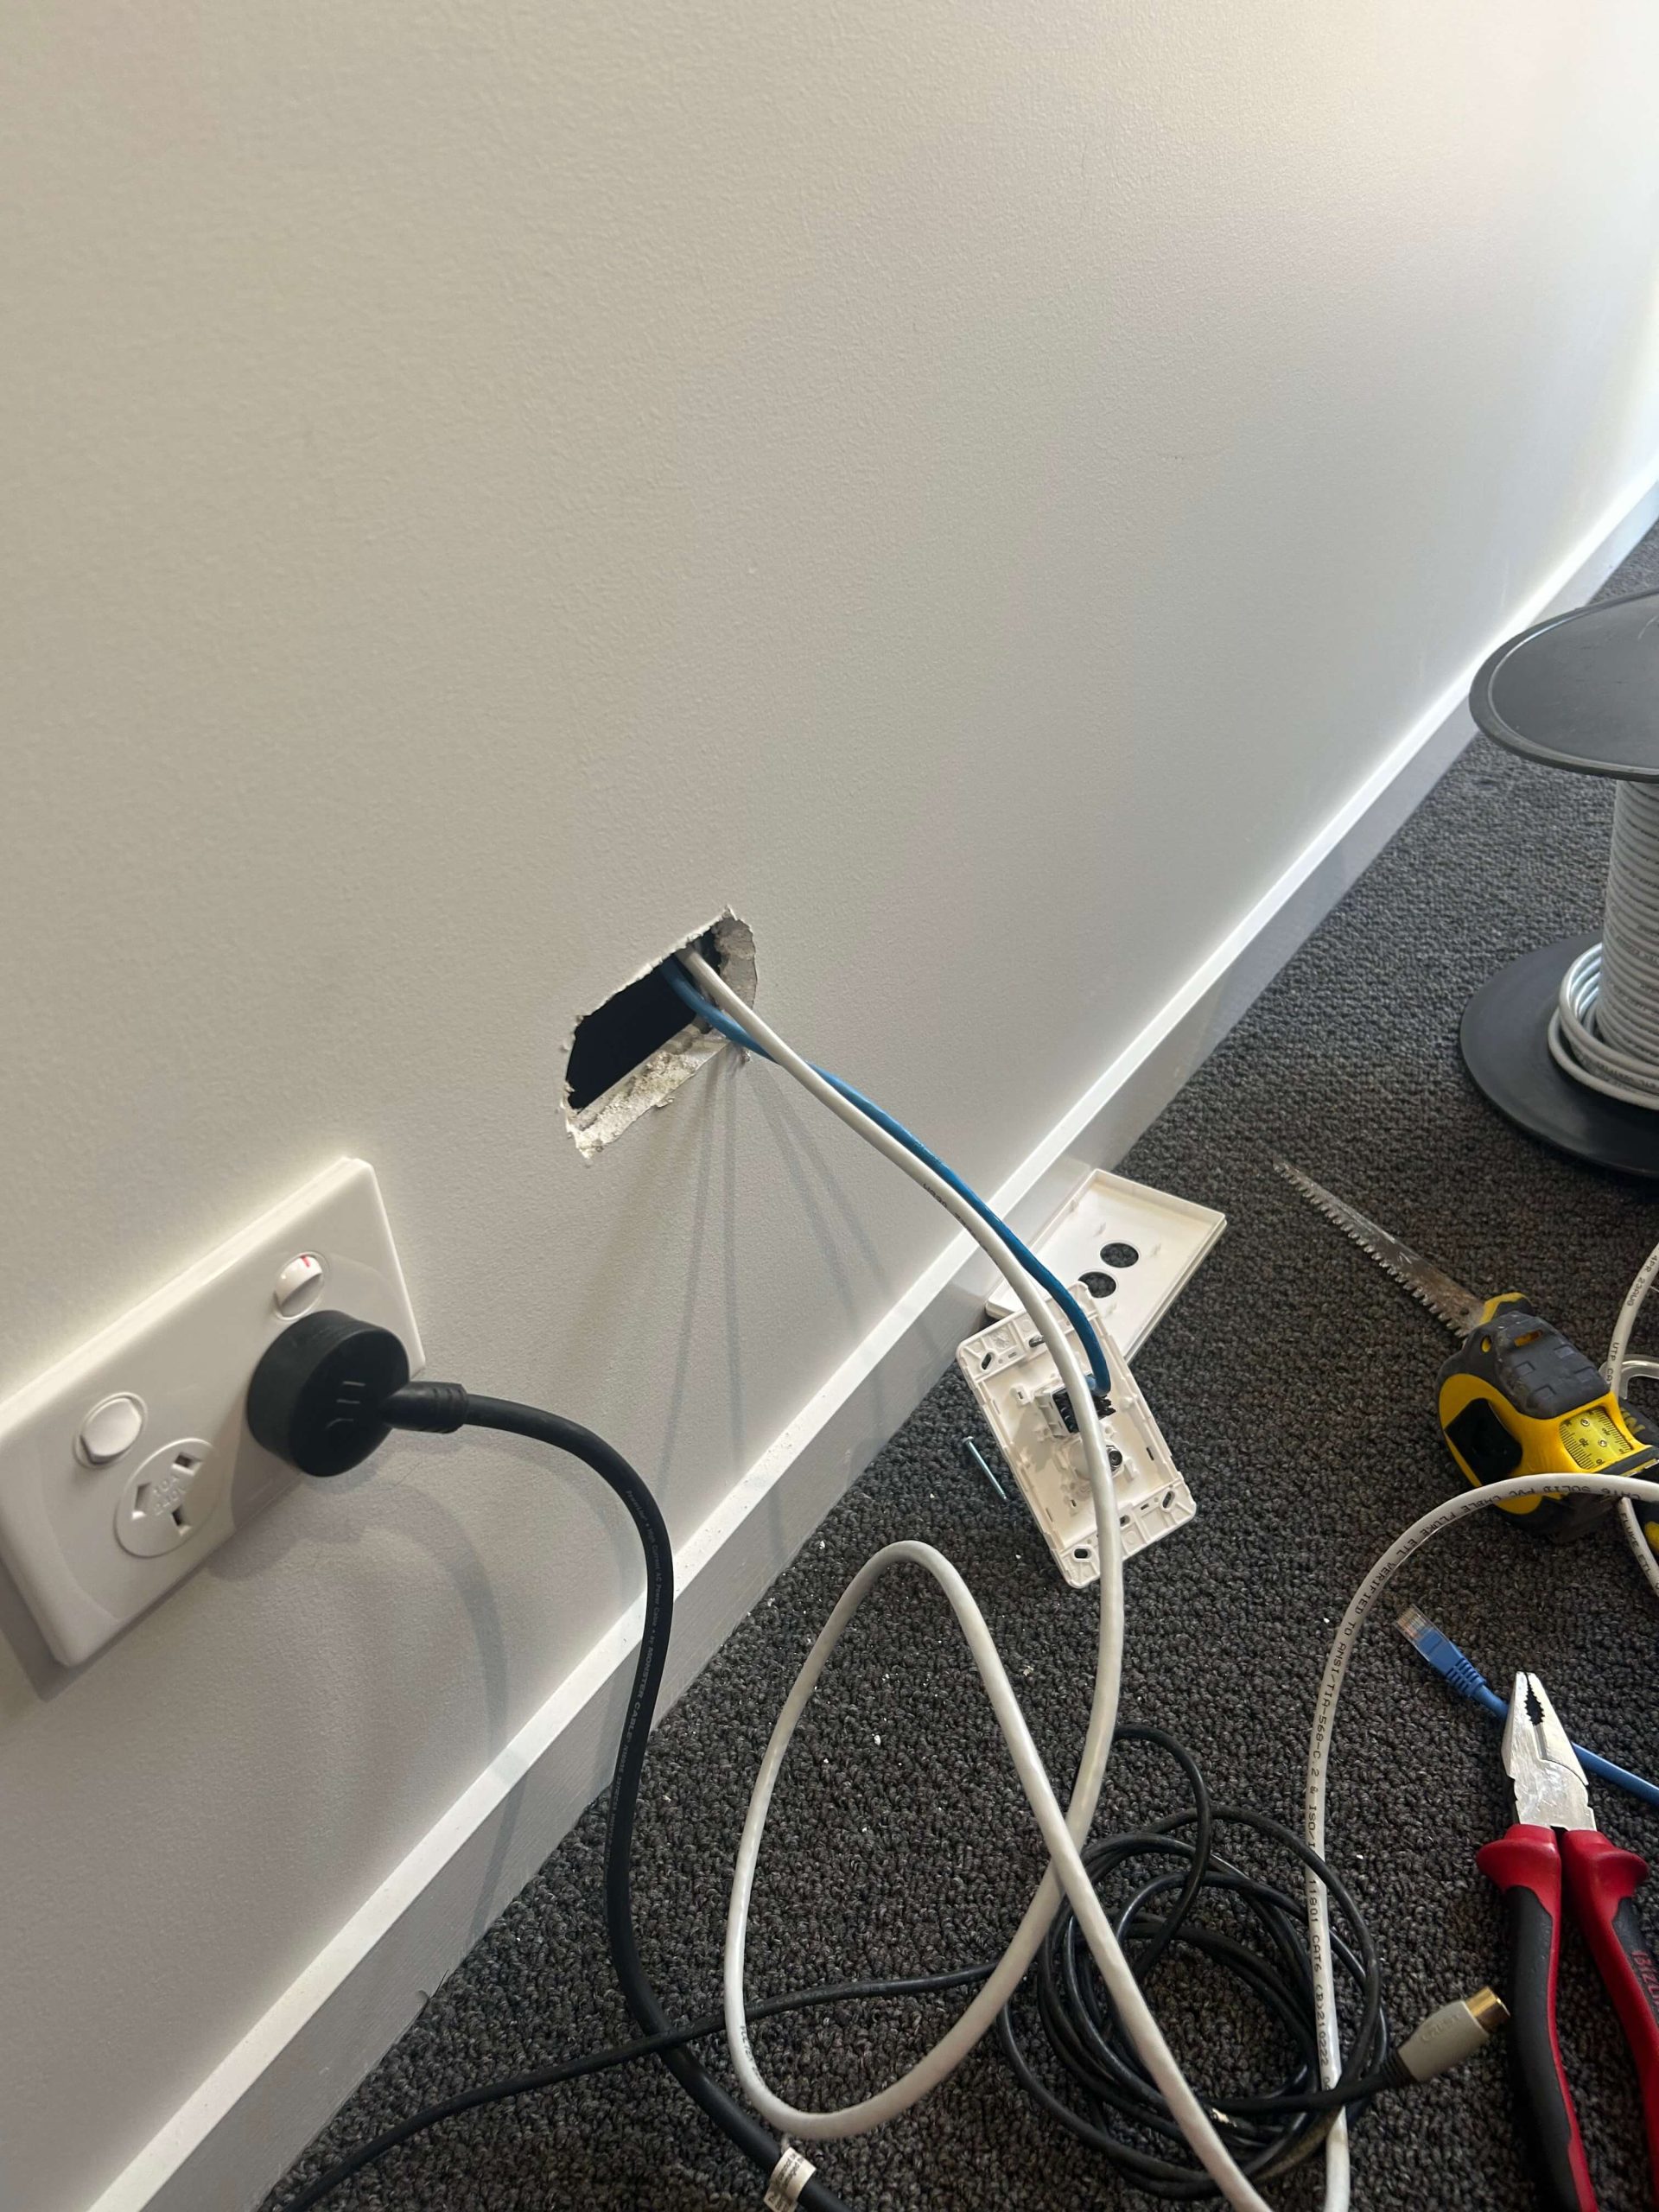 Electricity Wires Installation - Connex Electrical Services